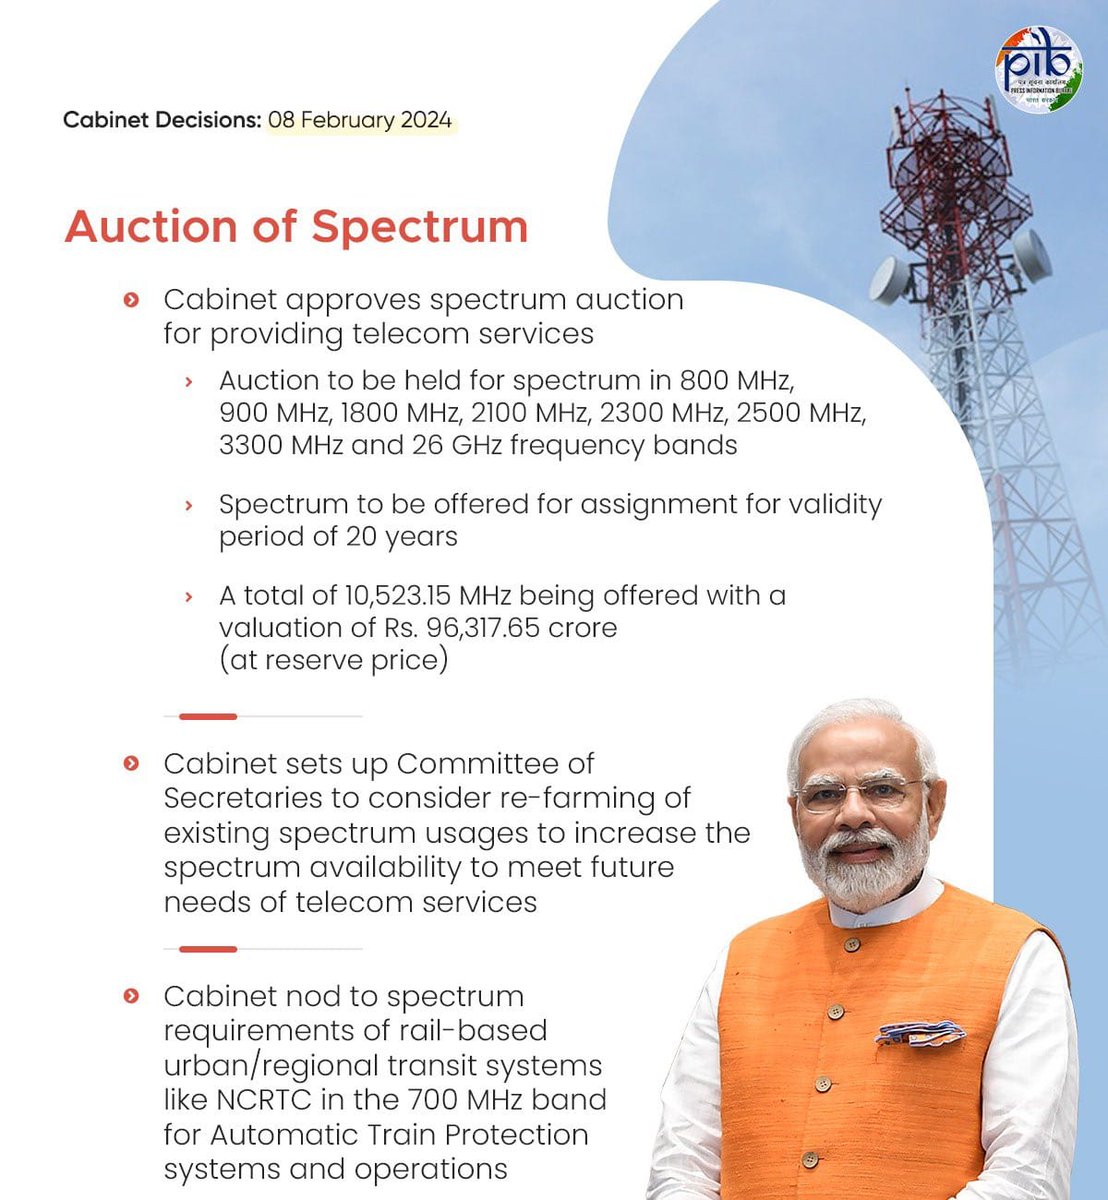 Under the guidance of Hon'ble PM Shri @narendramodi ji, the Union Cabinet has approved @DoT_India's proposal to conduct a #SpectrumAuction. This initiative aims to enhance telecom services' quality & coverage for consumers by allocating additional spectrum.

#CabinetDecisions